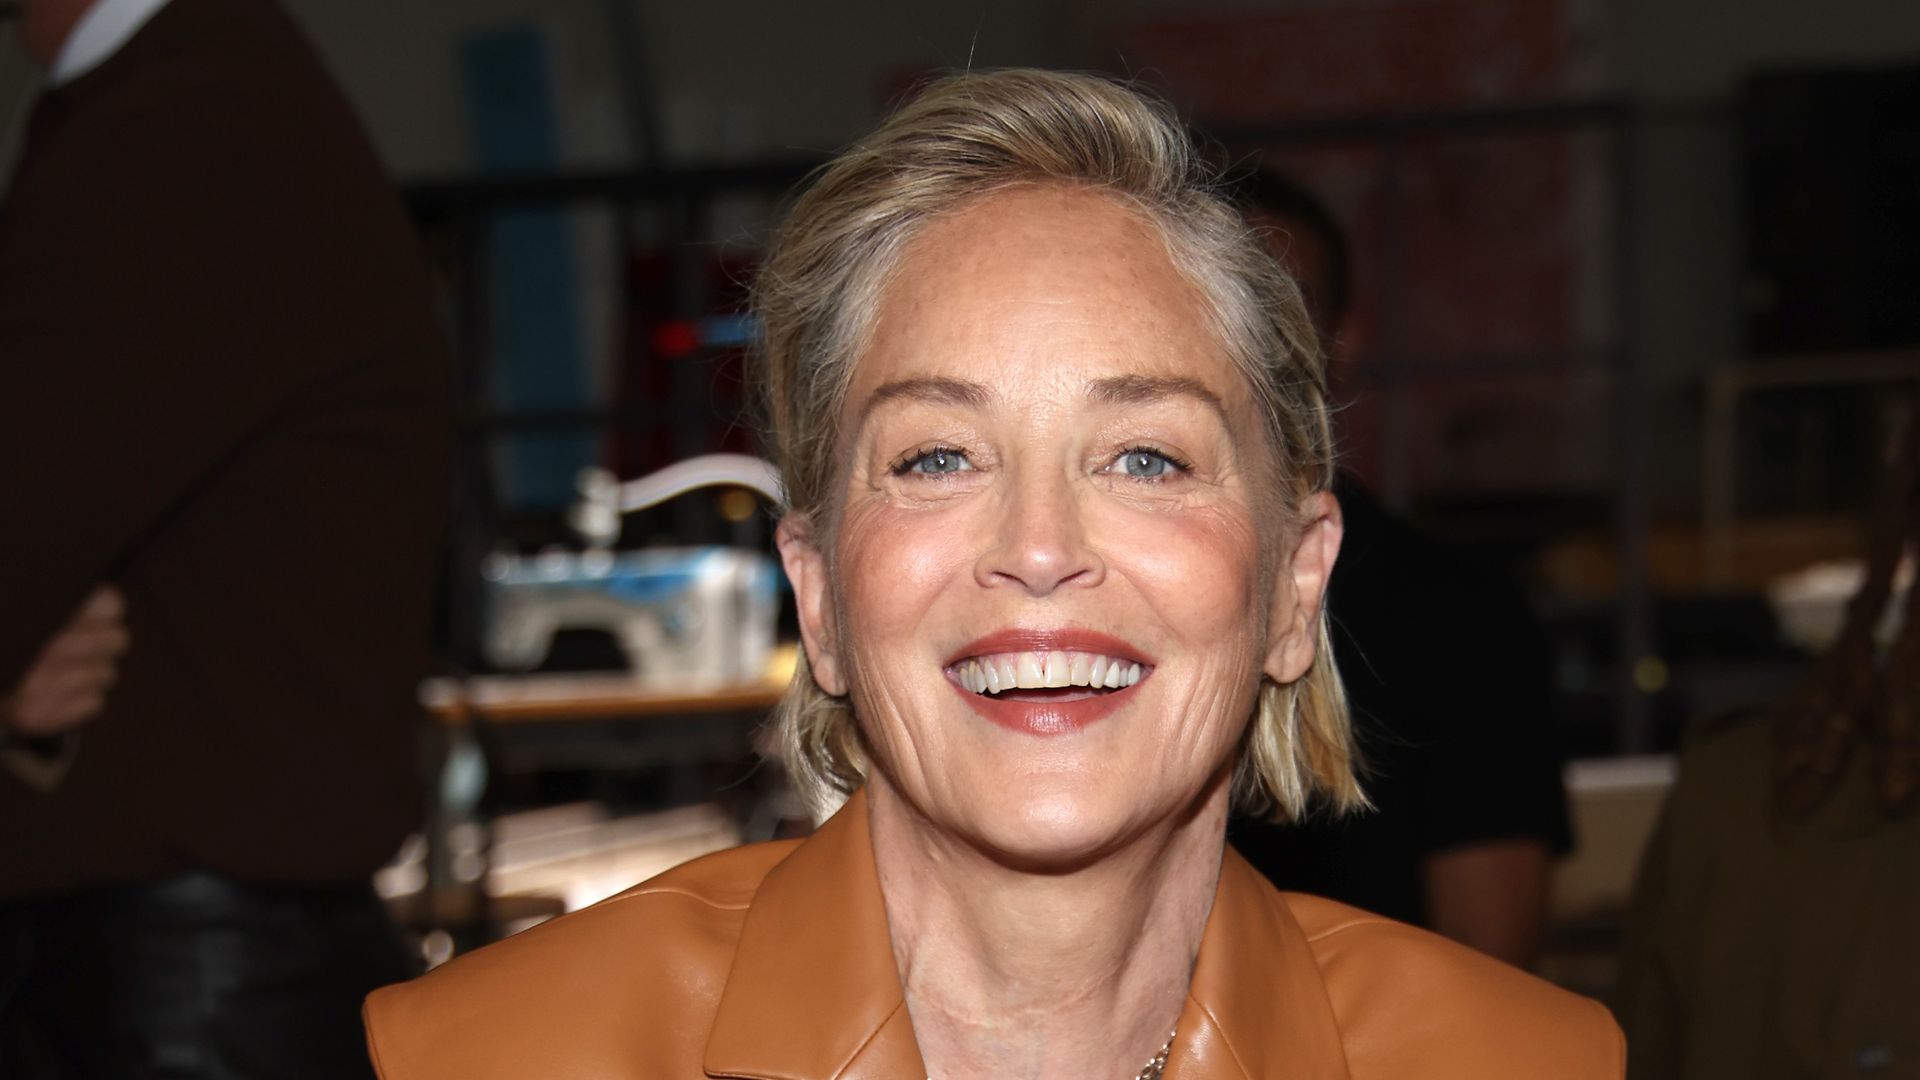 Sharon Stone shares shirtless photo of handsome son as he joins the family business